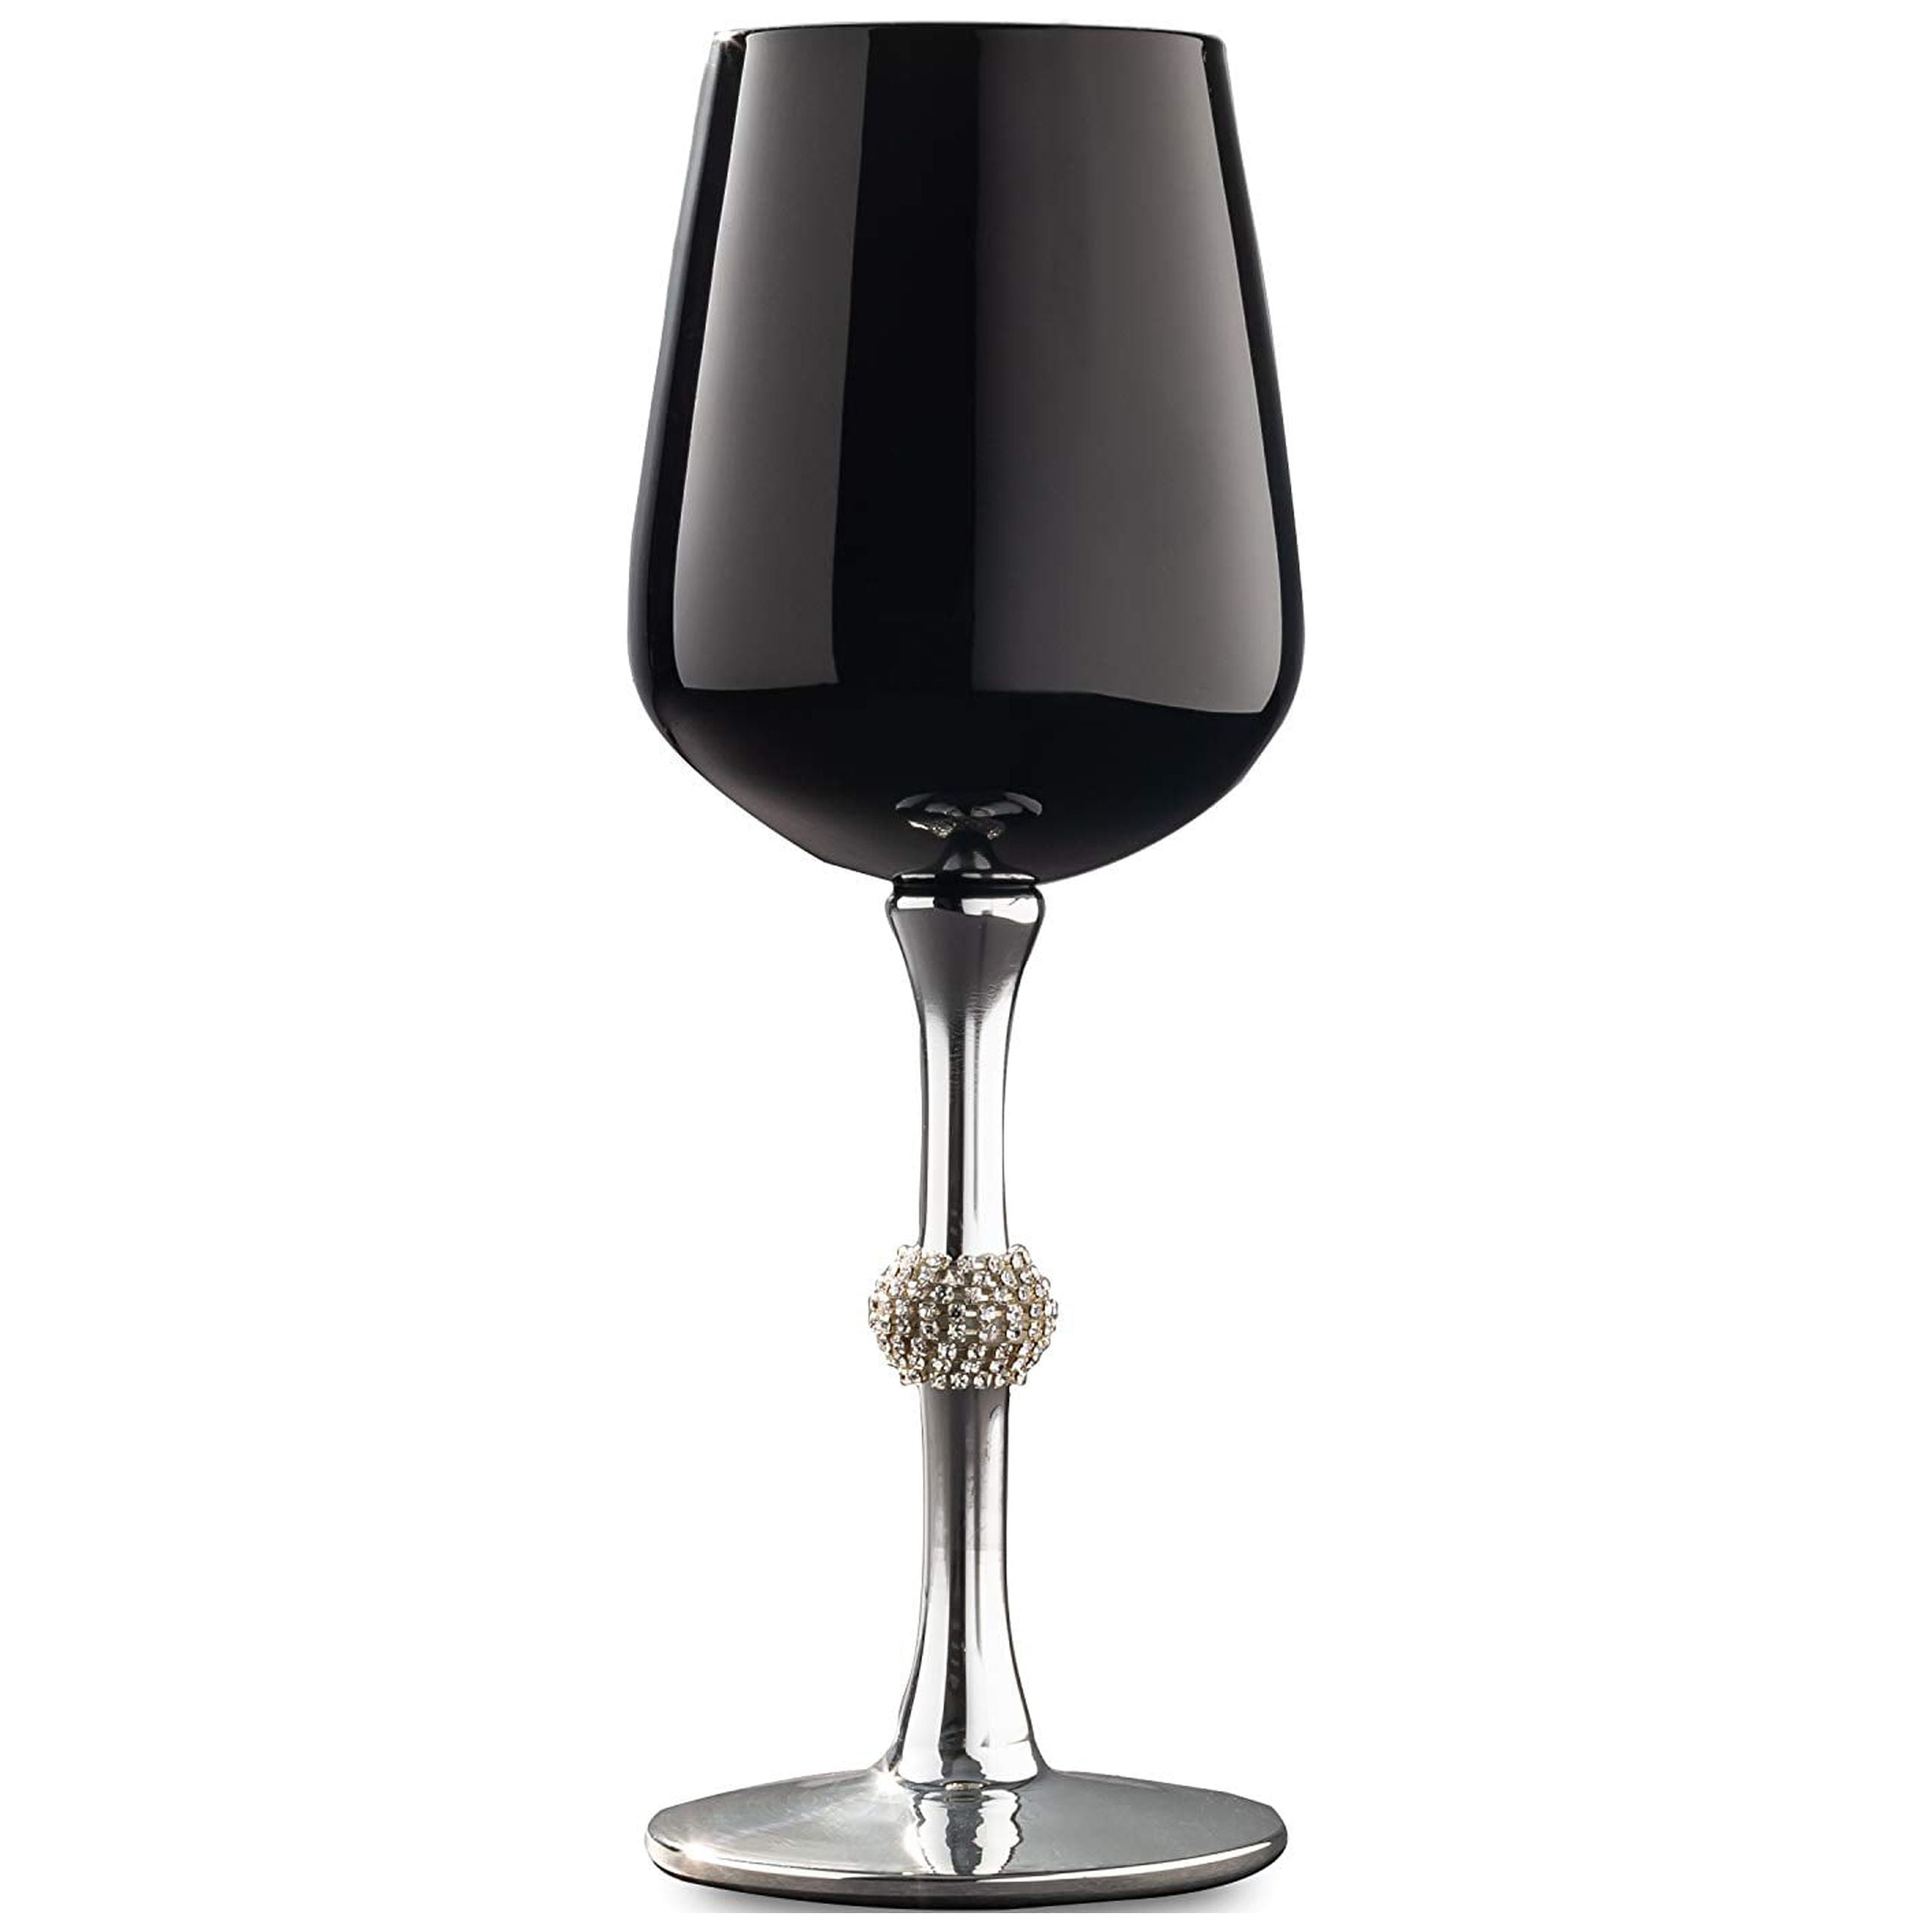 Vikko Dcor Black Wine Glasses: 11 Oz Fancy Wine Glasses With Stem For Red  And White Wine- Thick And Durable Wine Glass- Dishwasher Safe - Great For